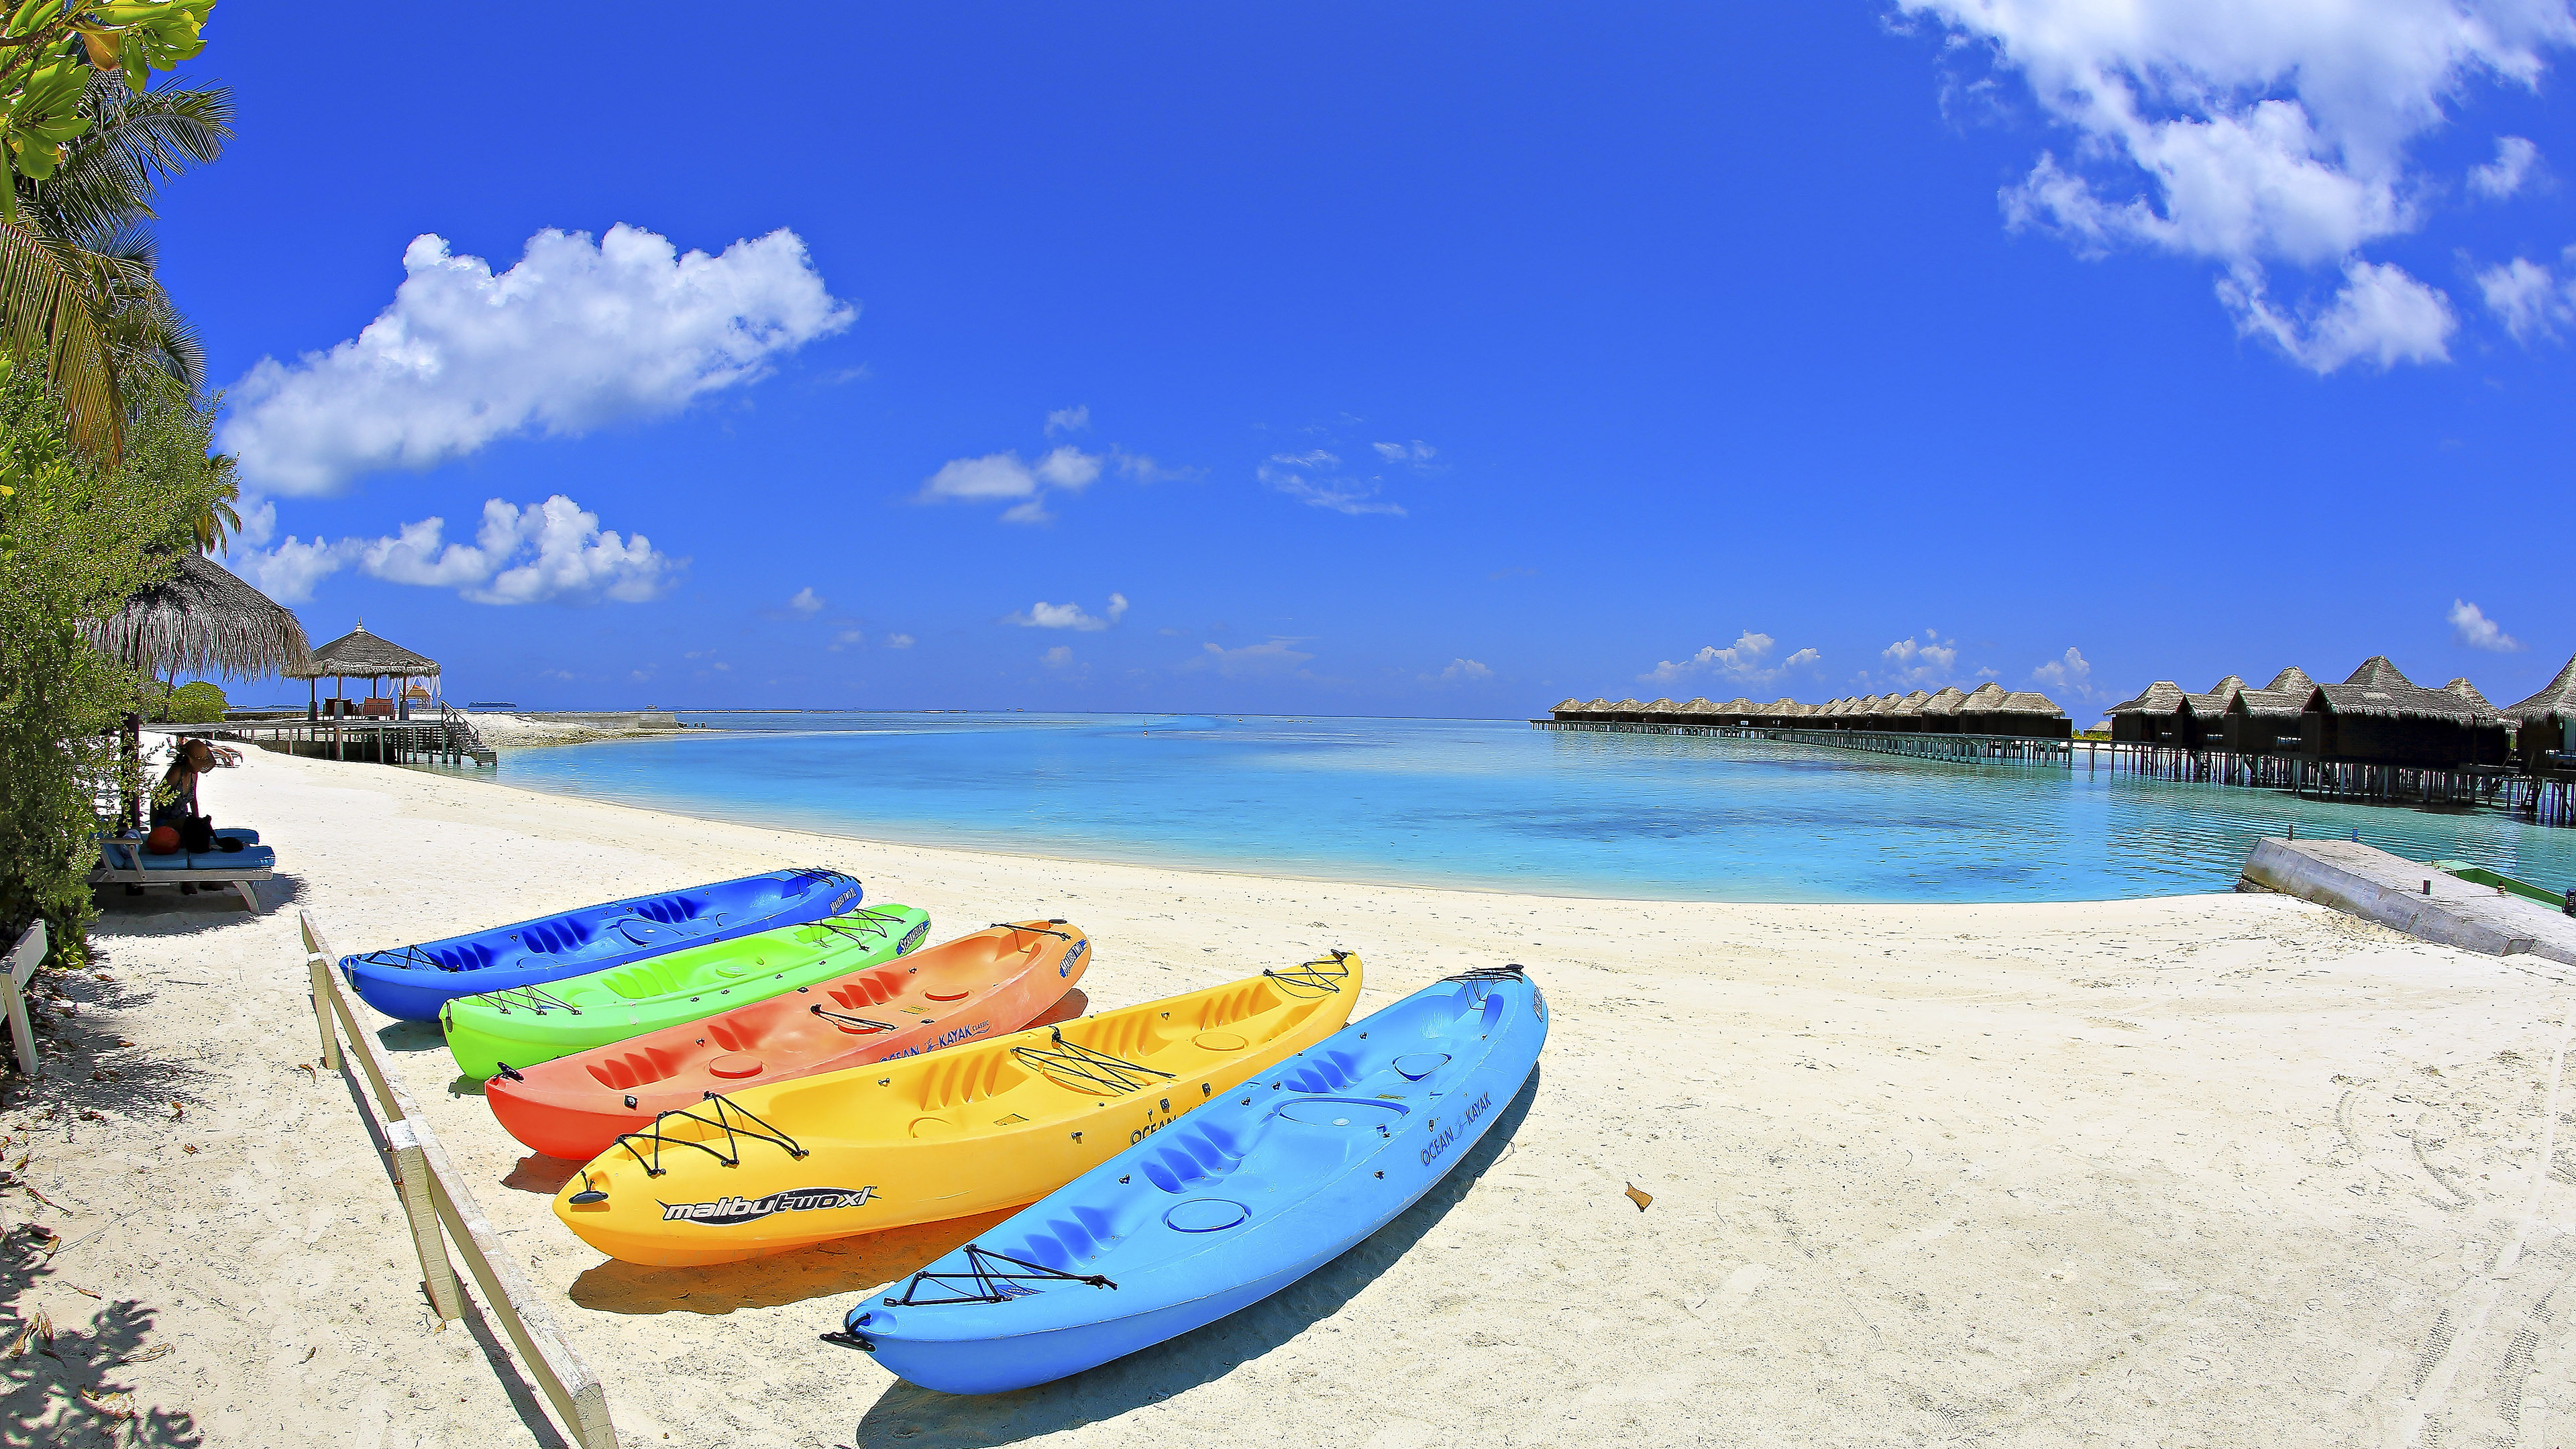 colorful-boats-on-the-beach-41445.jpg